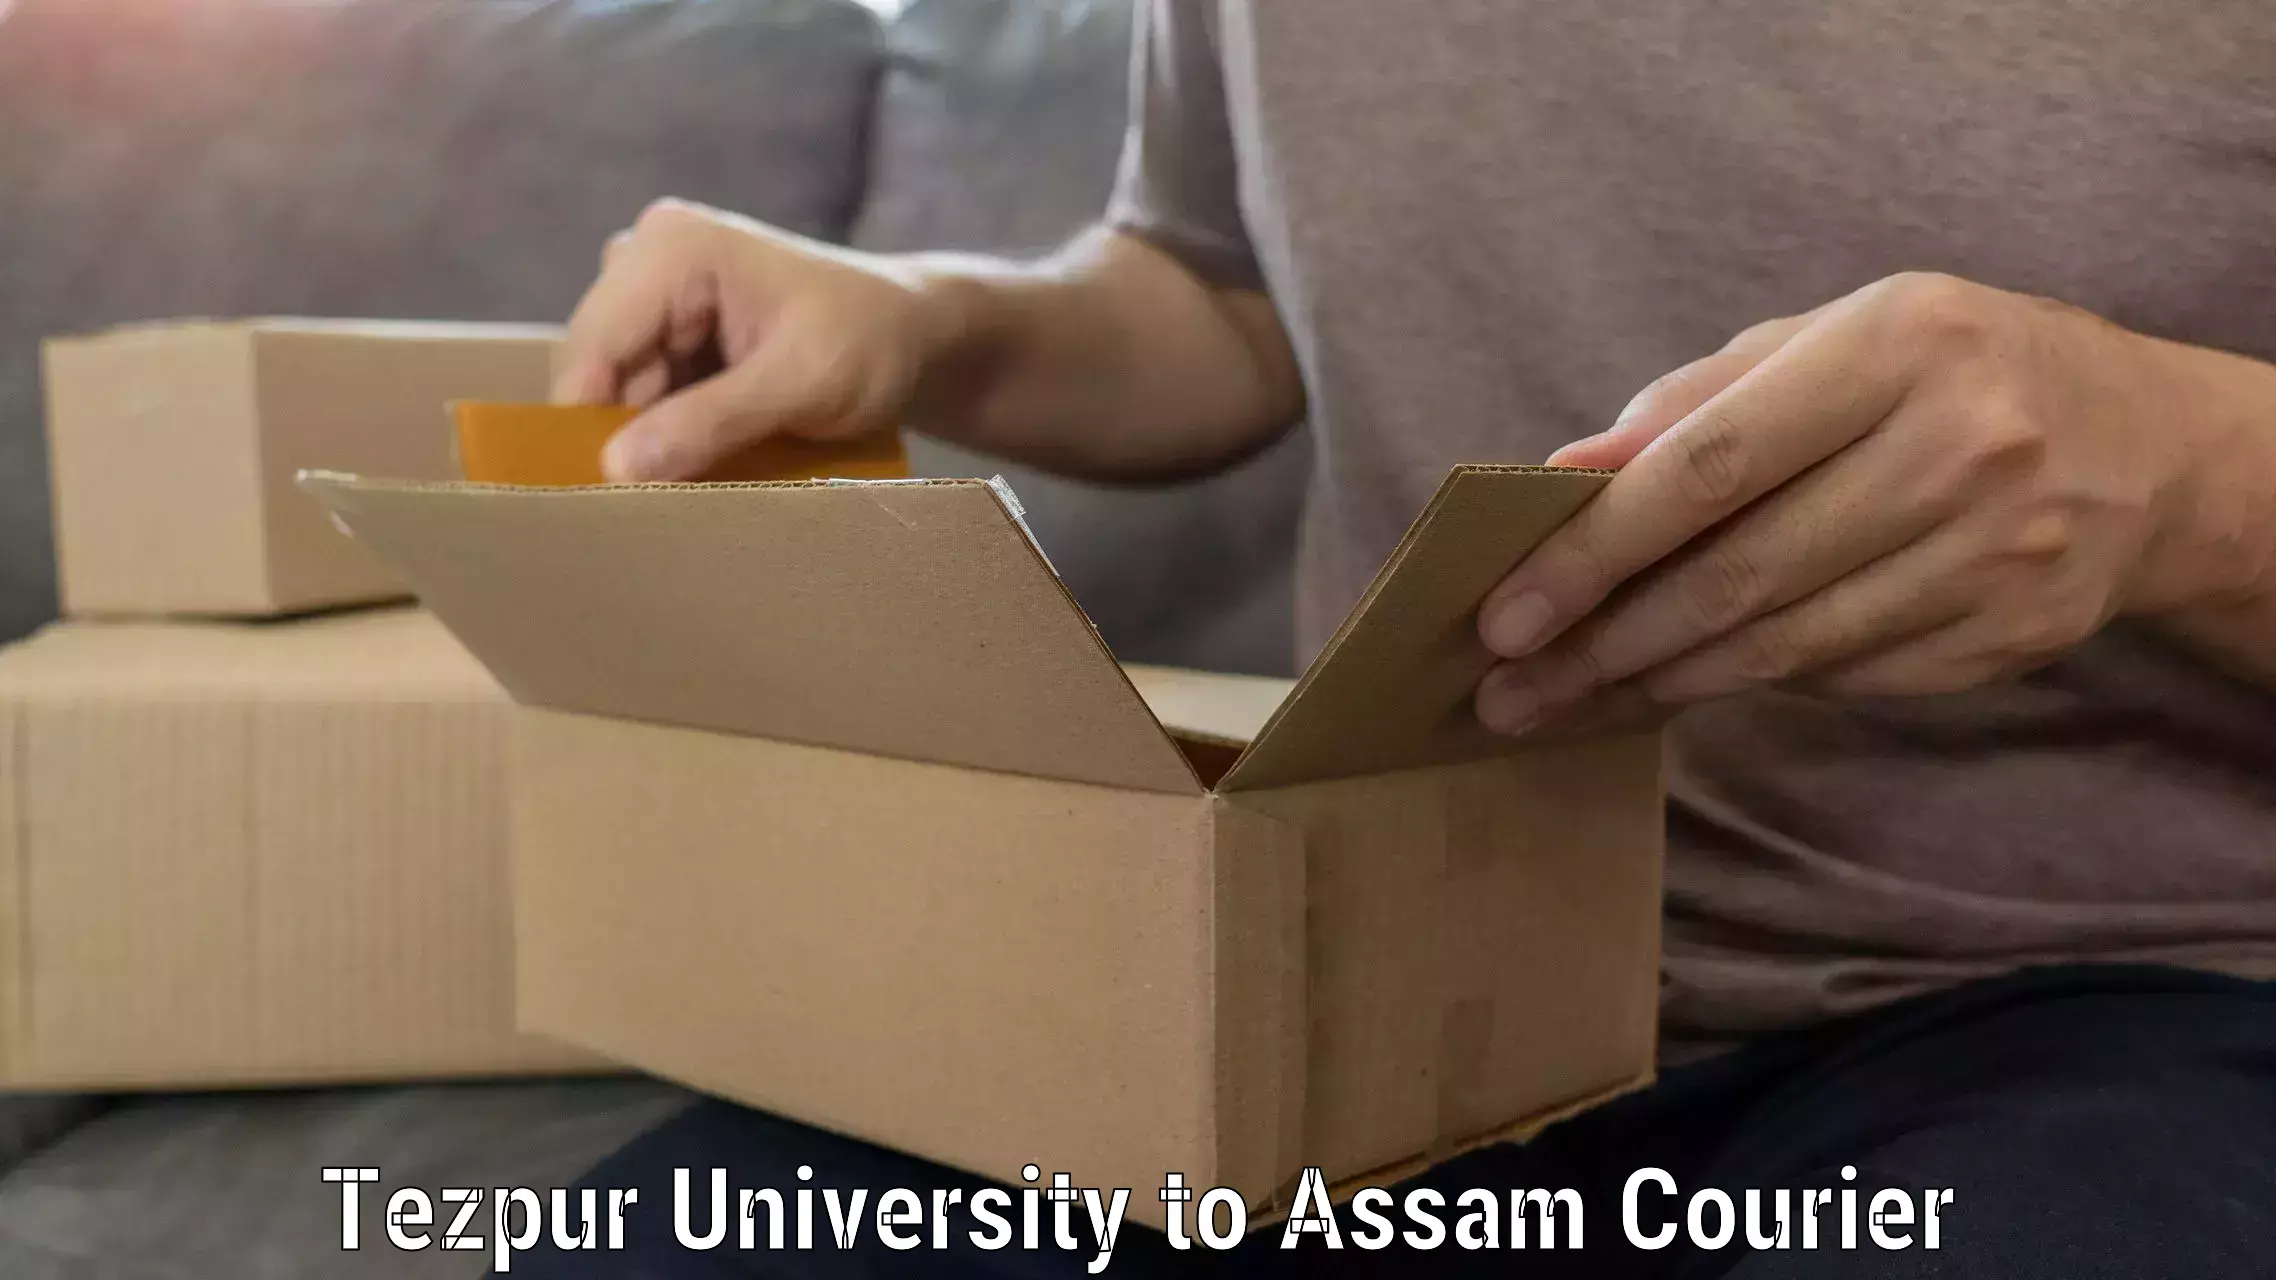 Affordable relocation services Tezpur University to Dhemaji